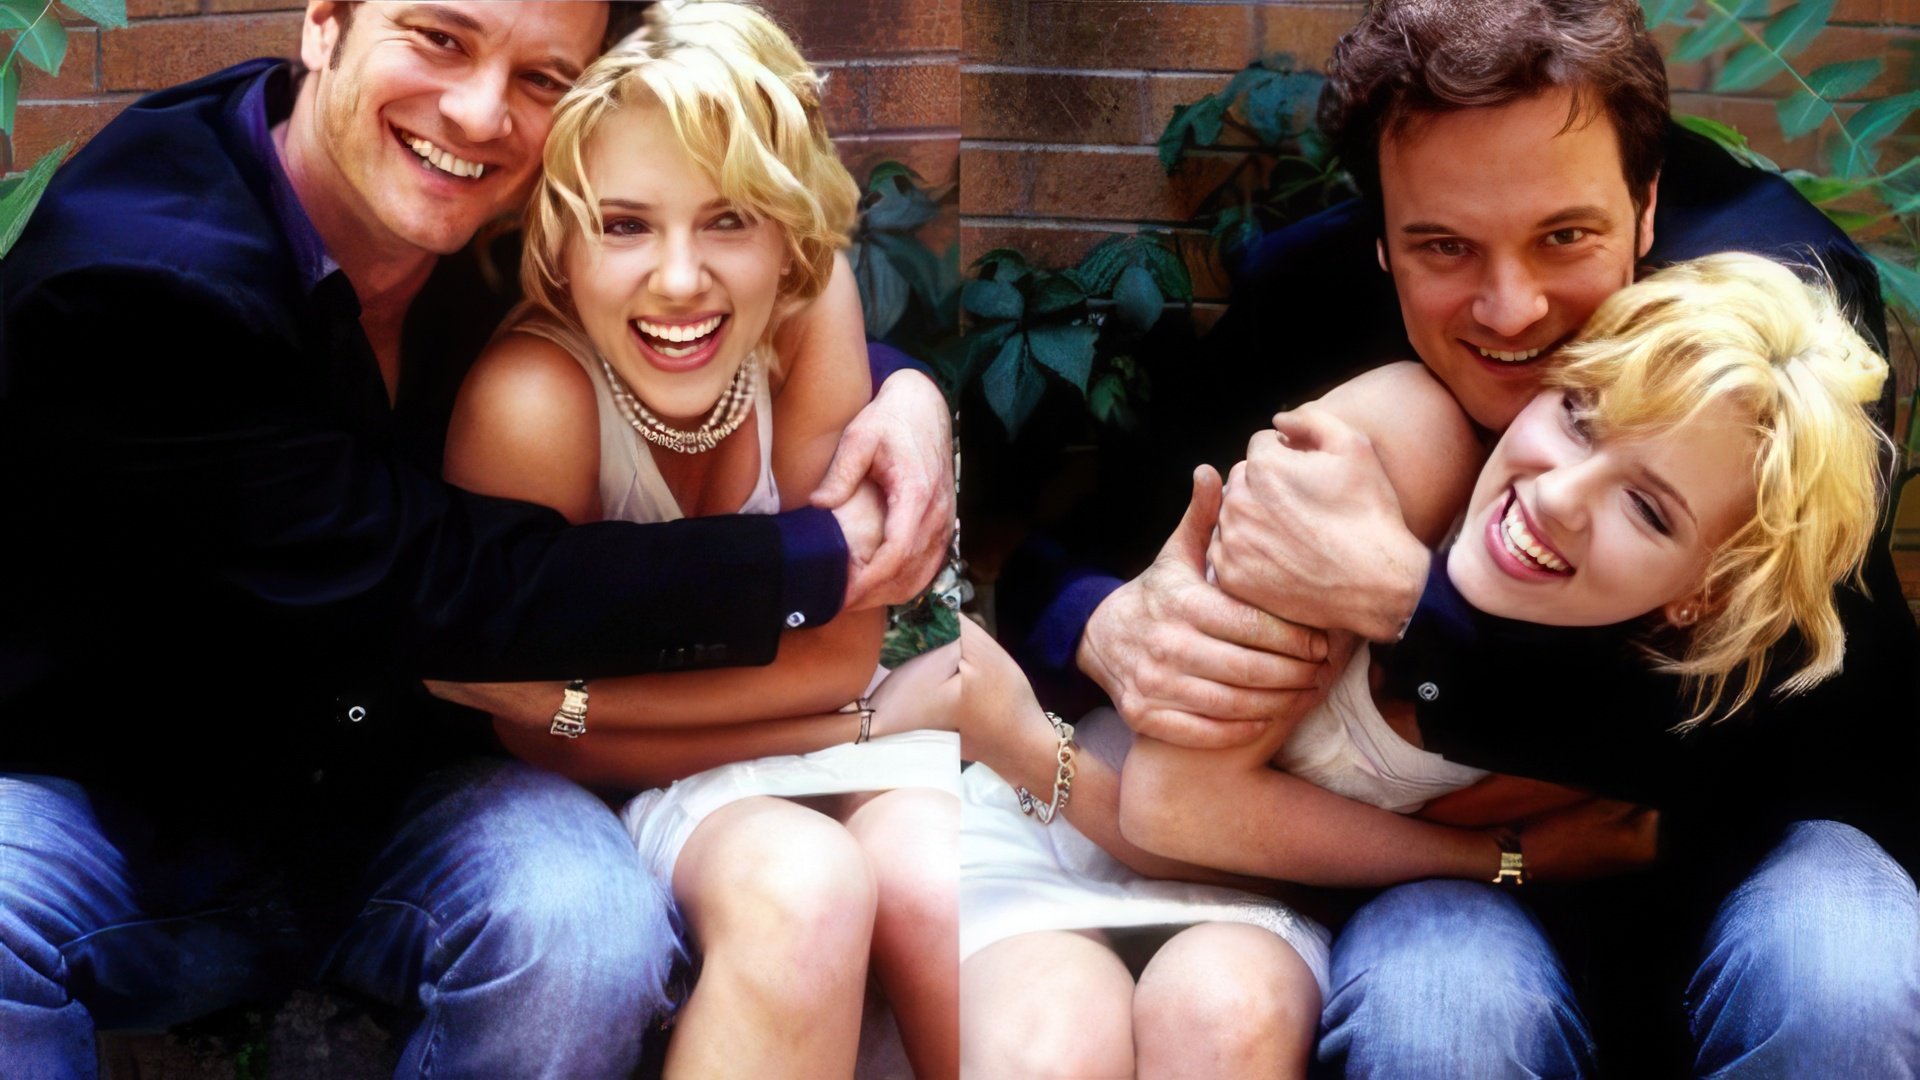 On the photo: Colin Firth and Scarlett Johansson